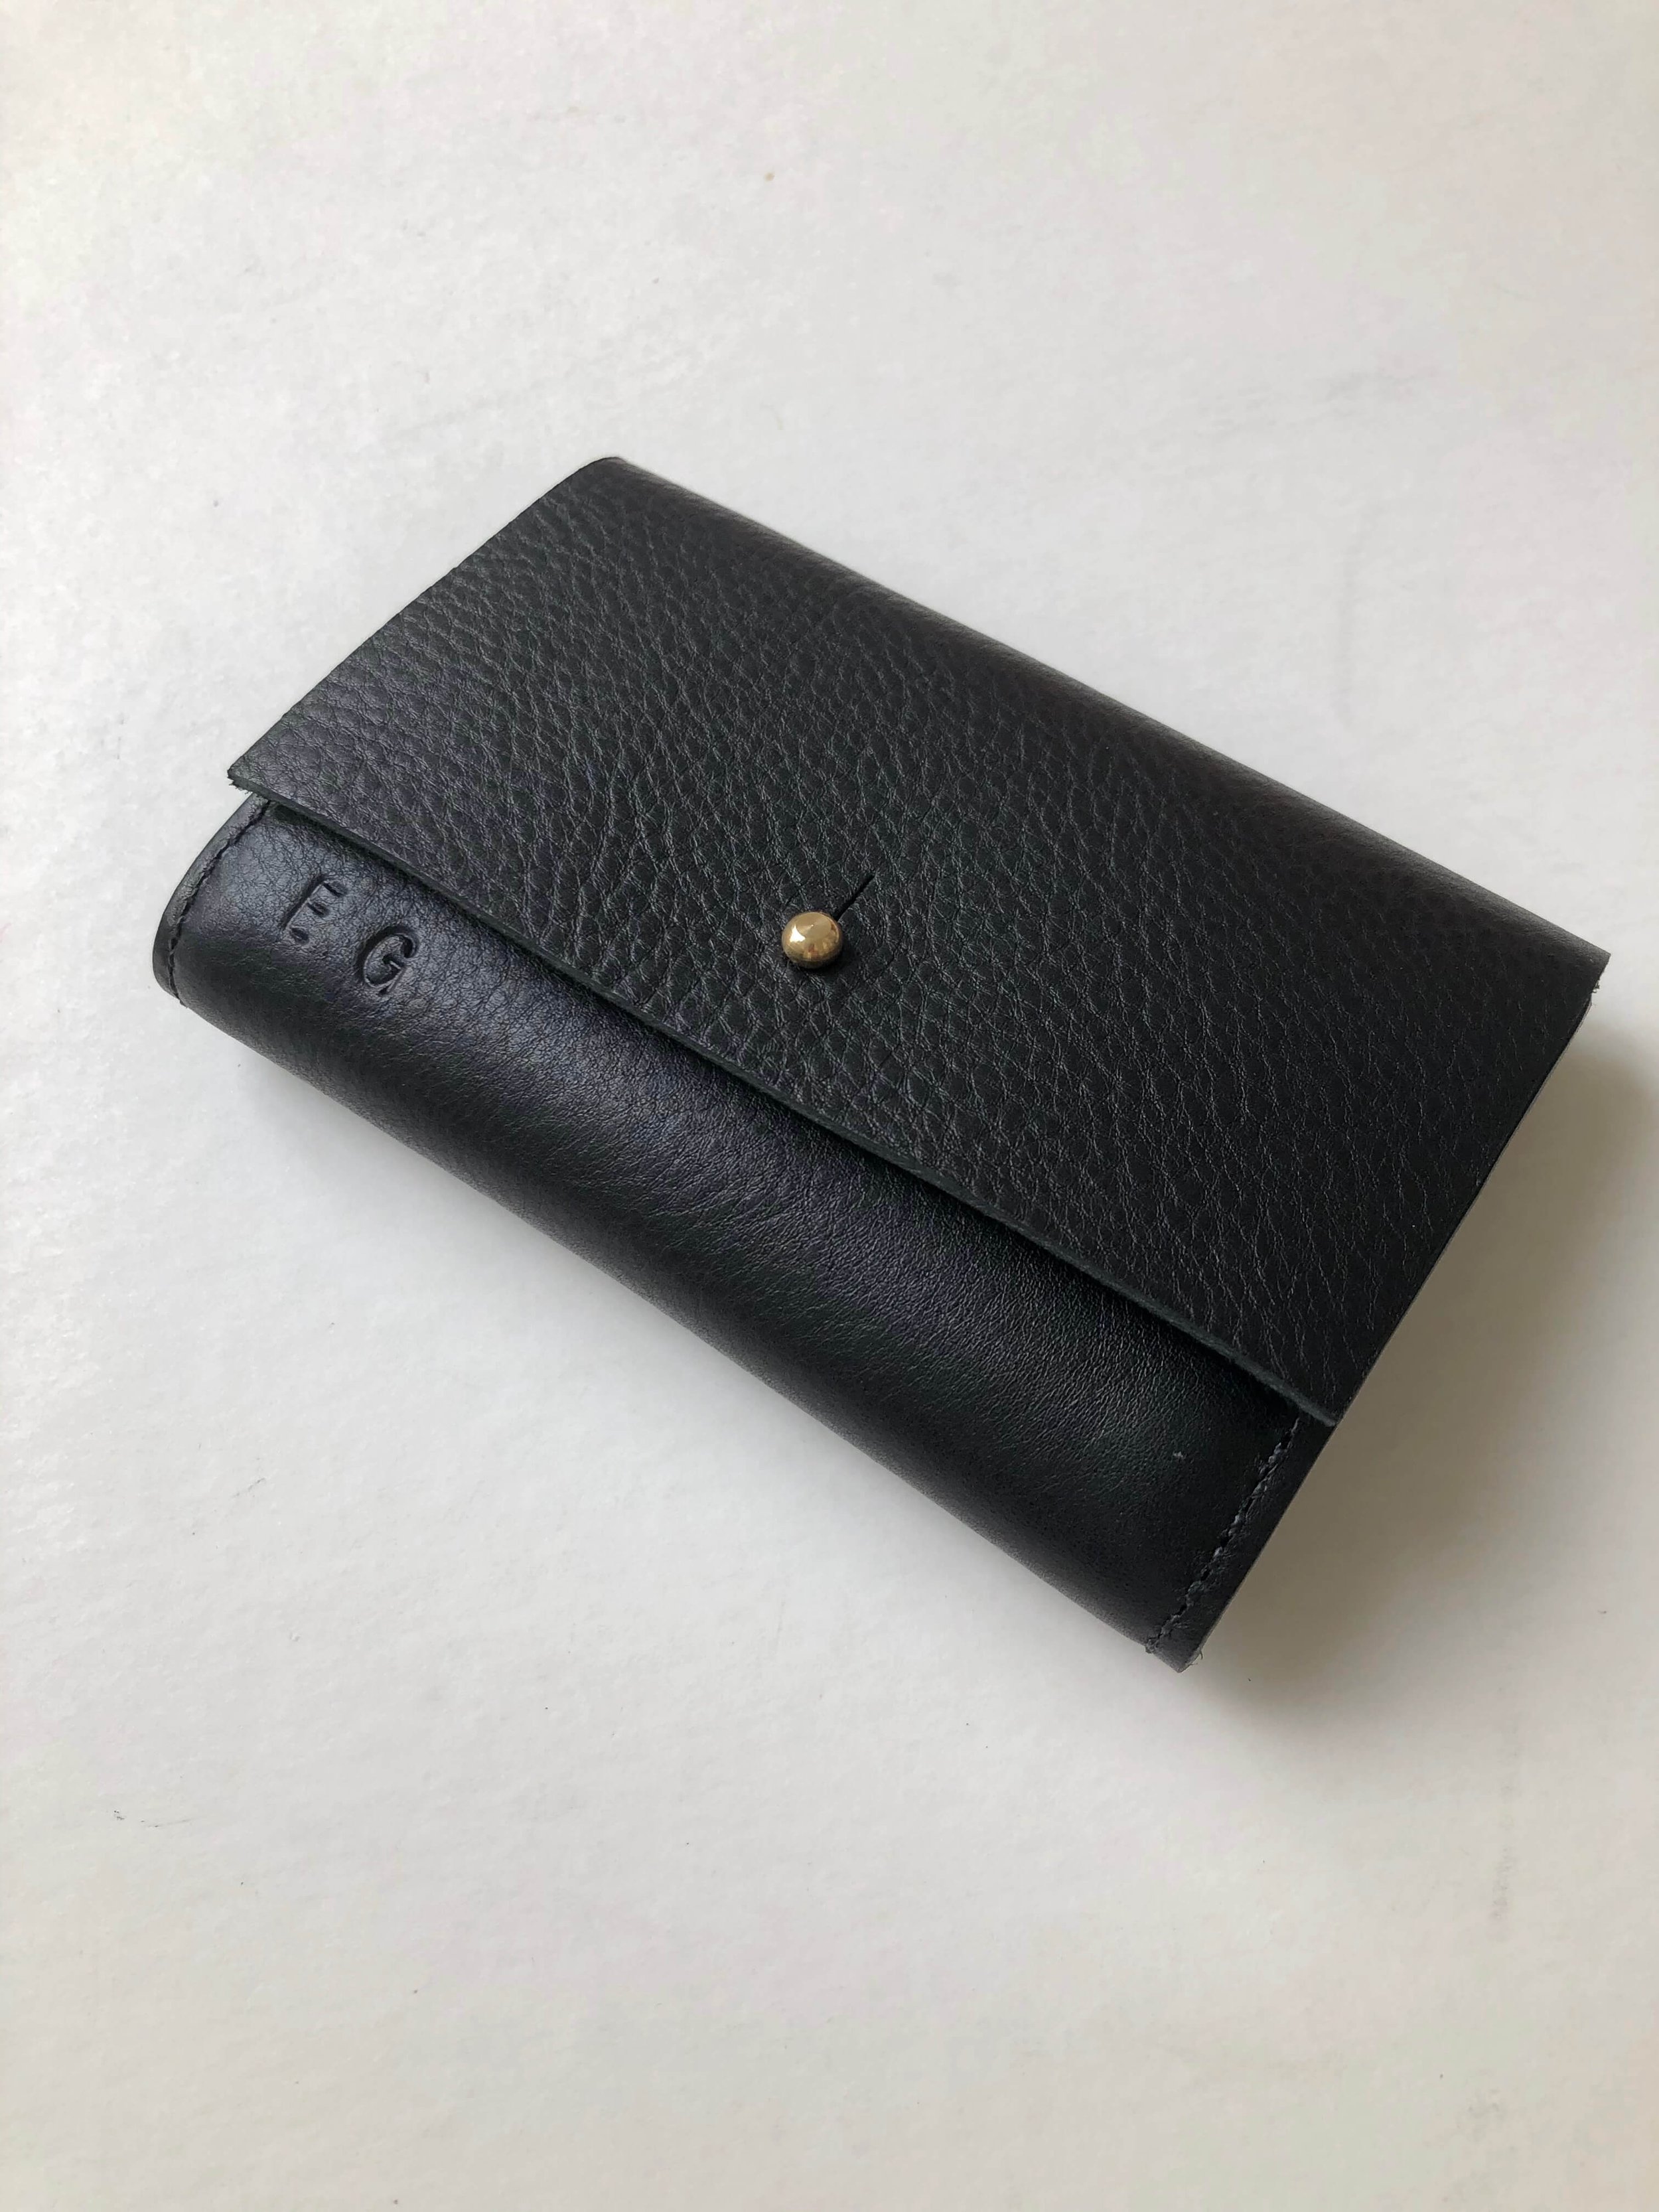 CARV sustainable leather purse in black handmade in the UK